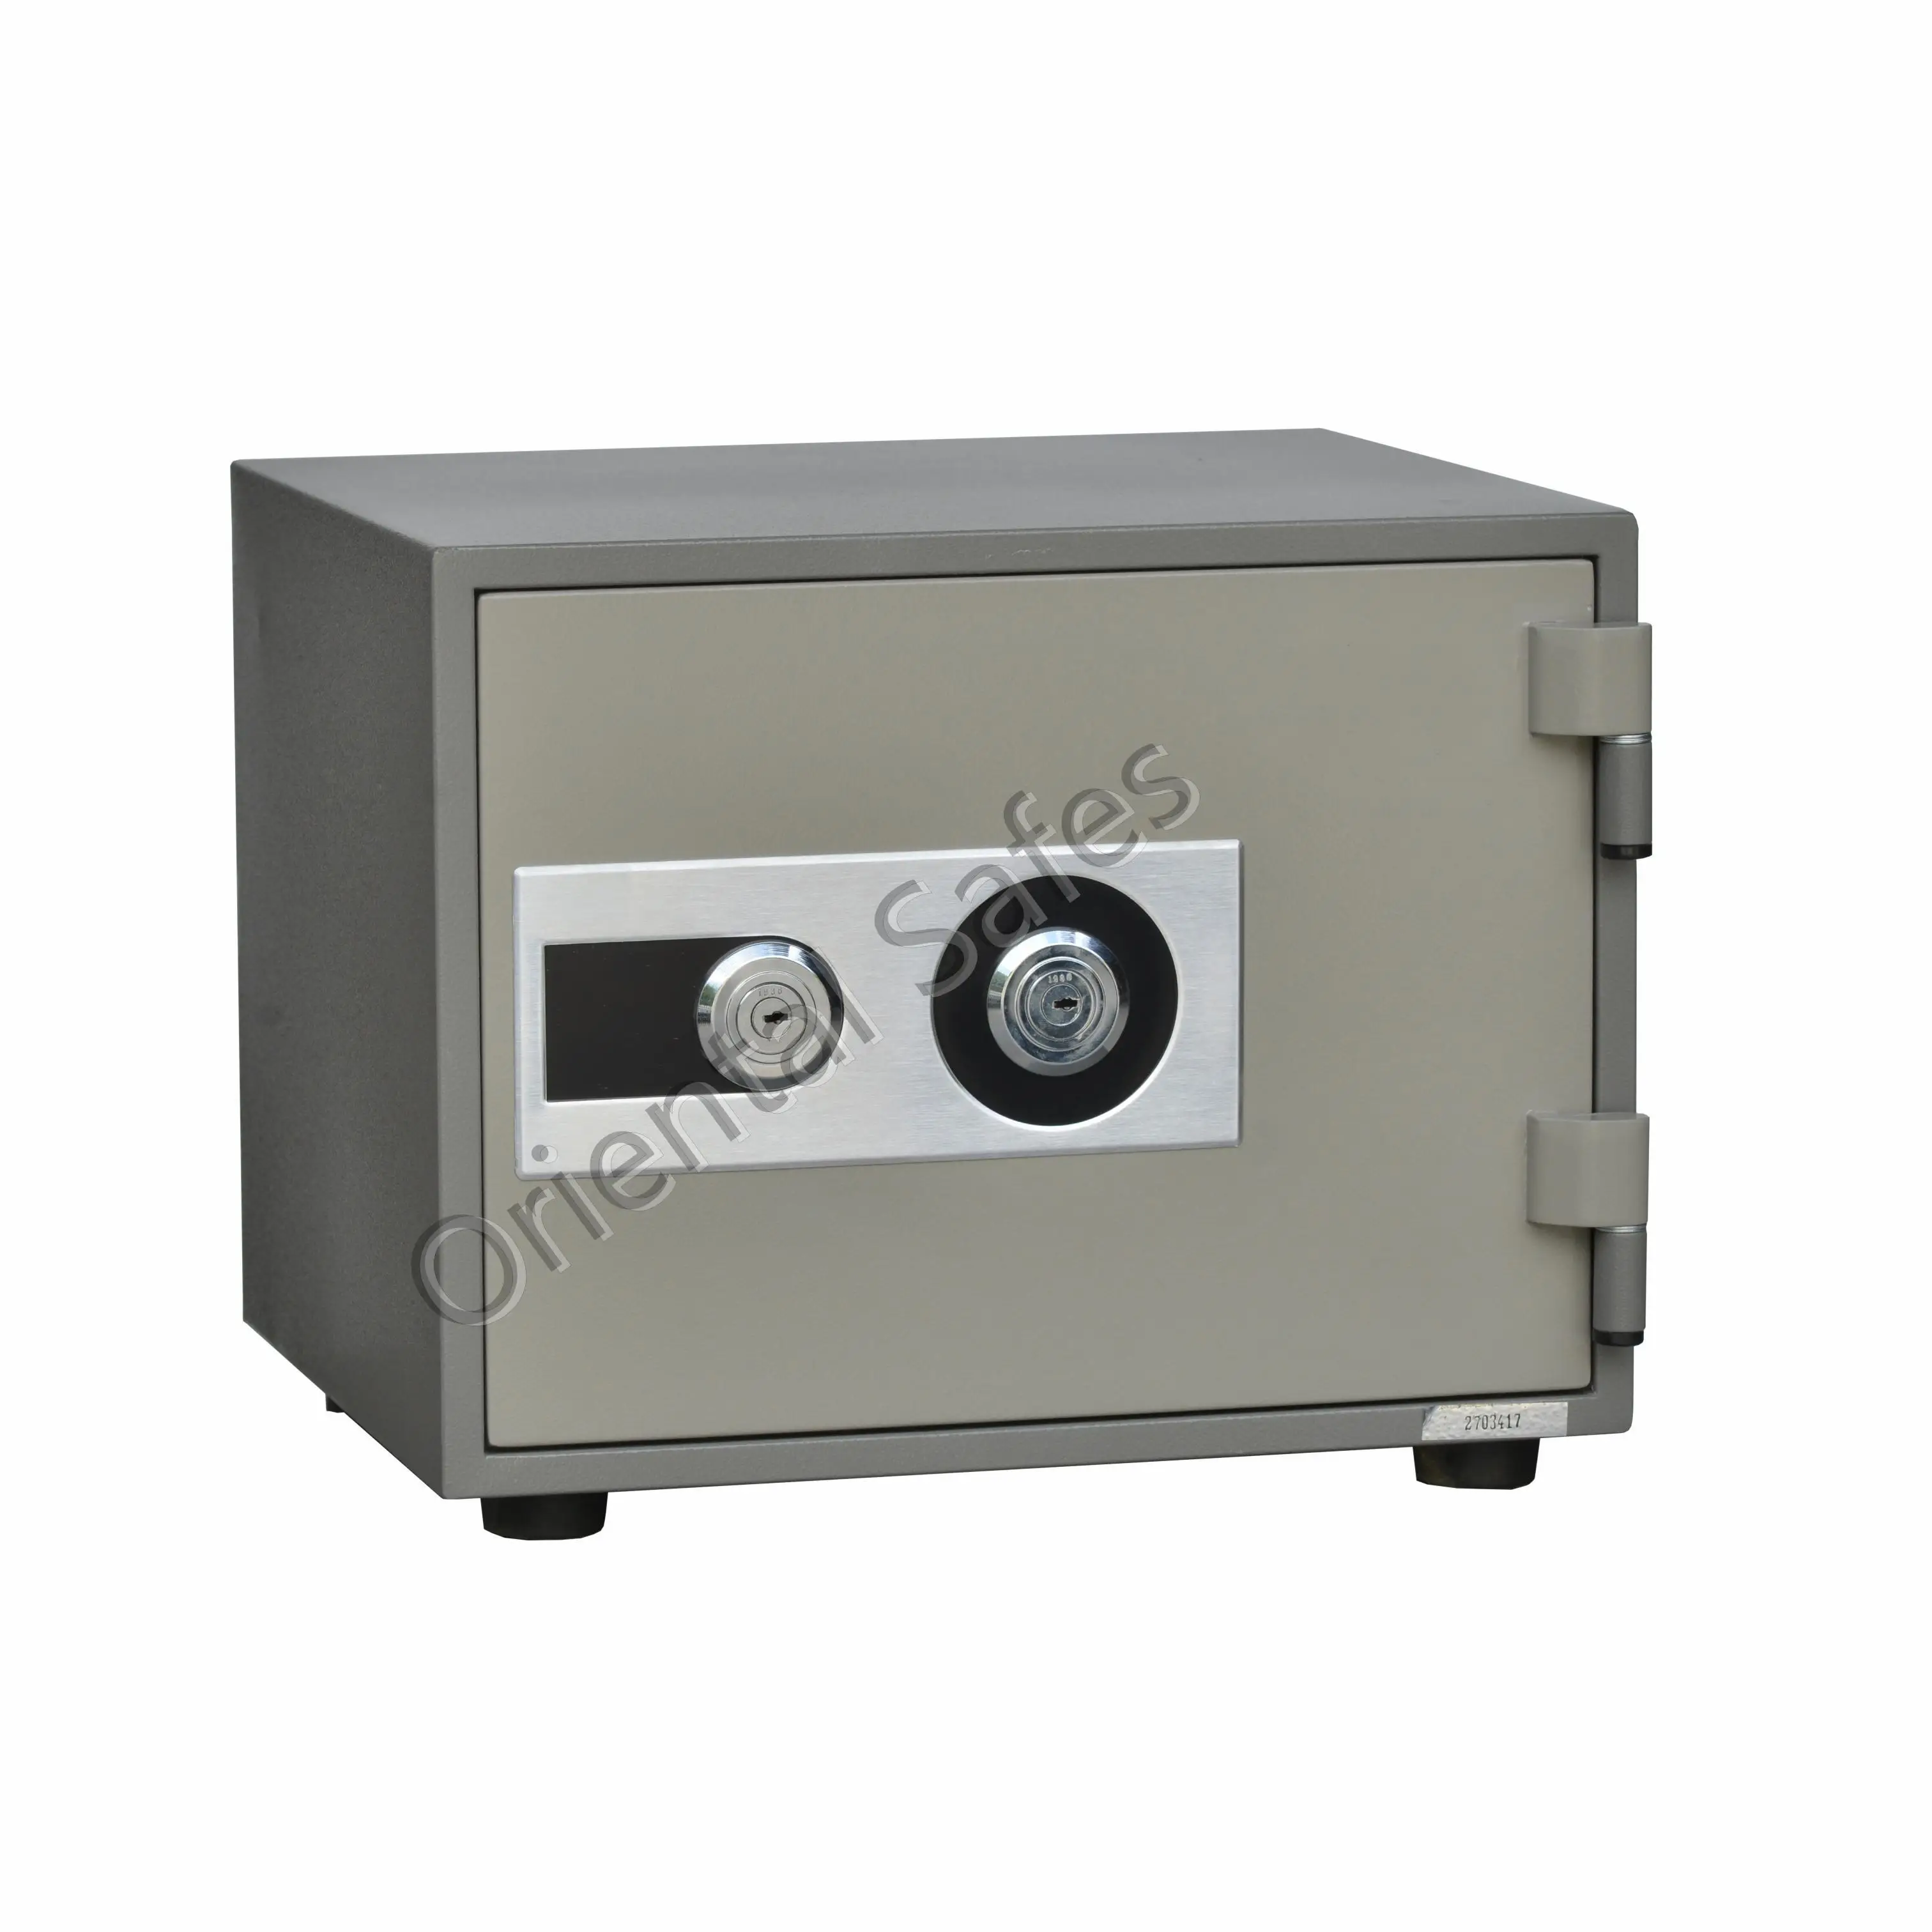 

28 KGS fireproof safes 2 two keys fire safe box for documents and home use Oriental Safes